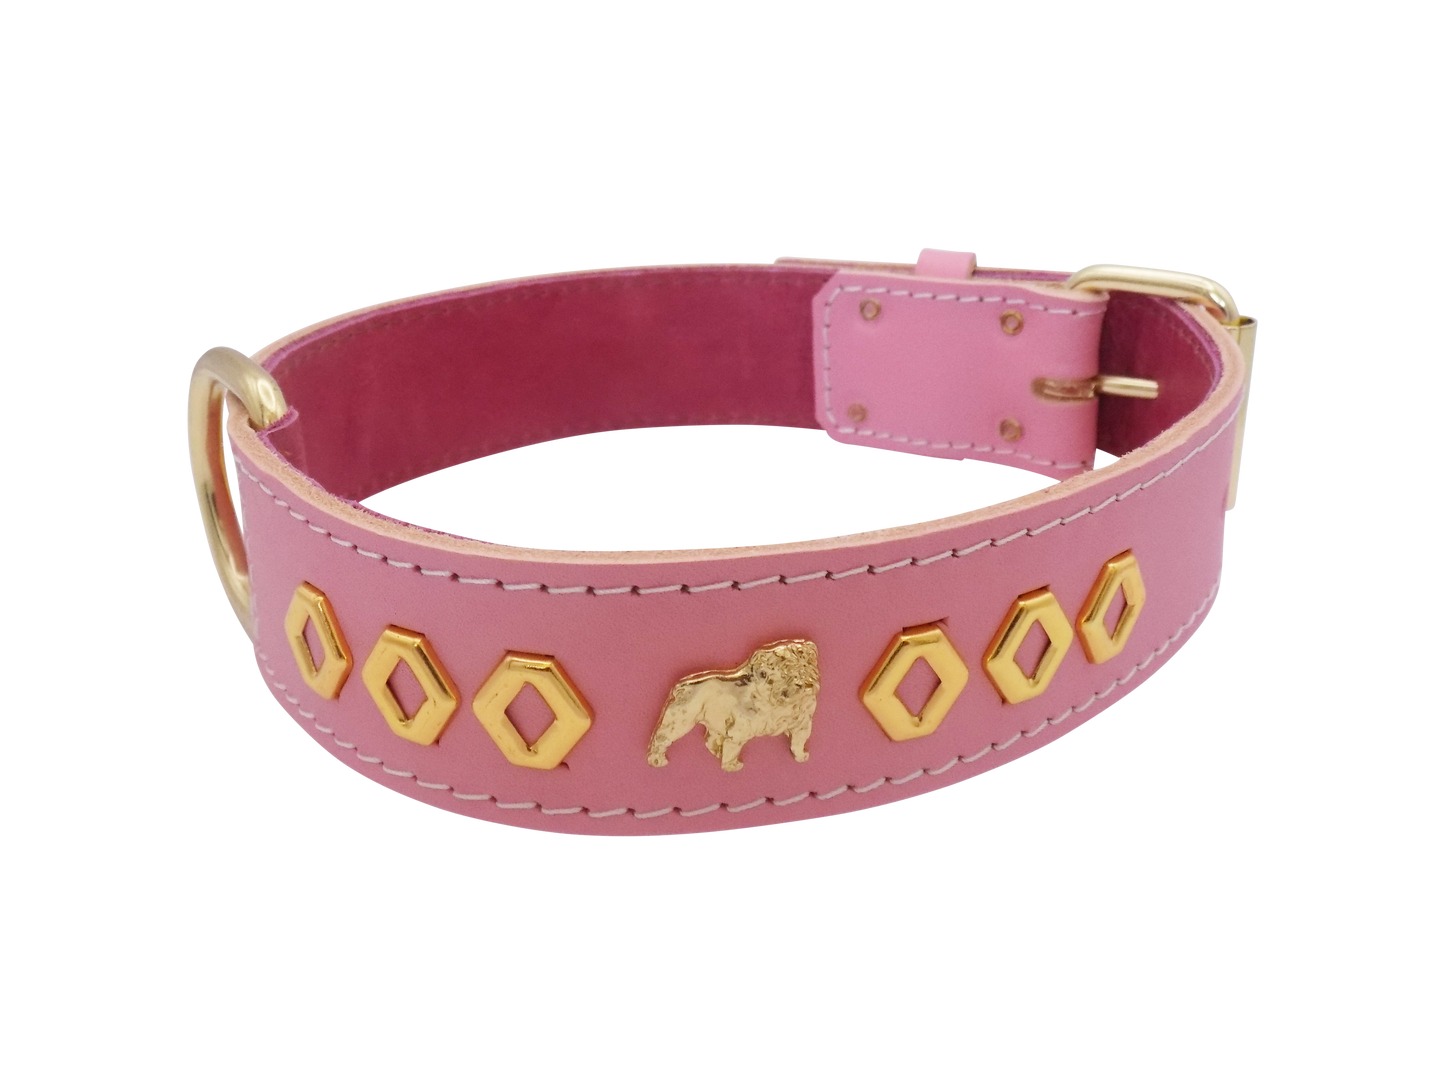 1.5" wide Leather Dog Collar with Unique Gold Design and English Bulldog Badges